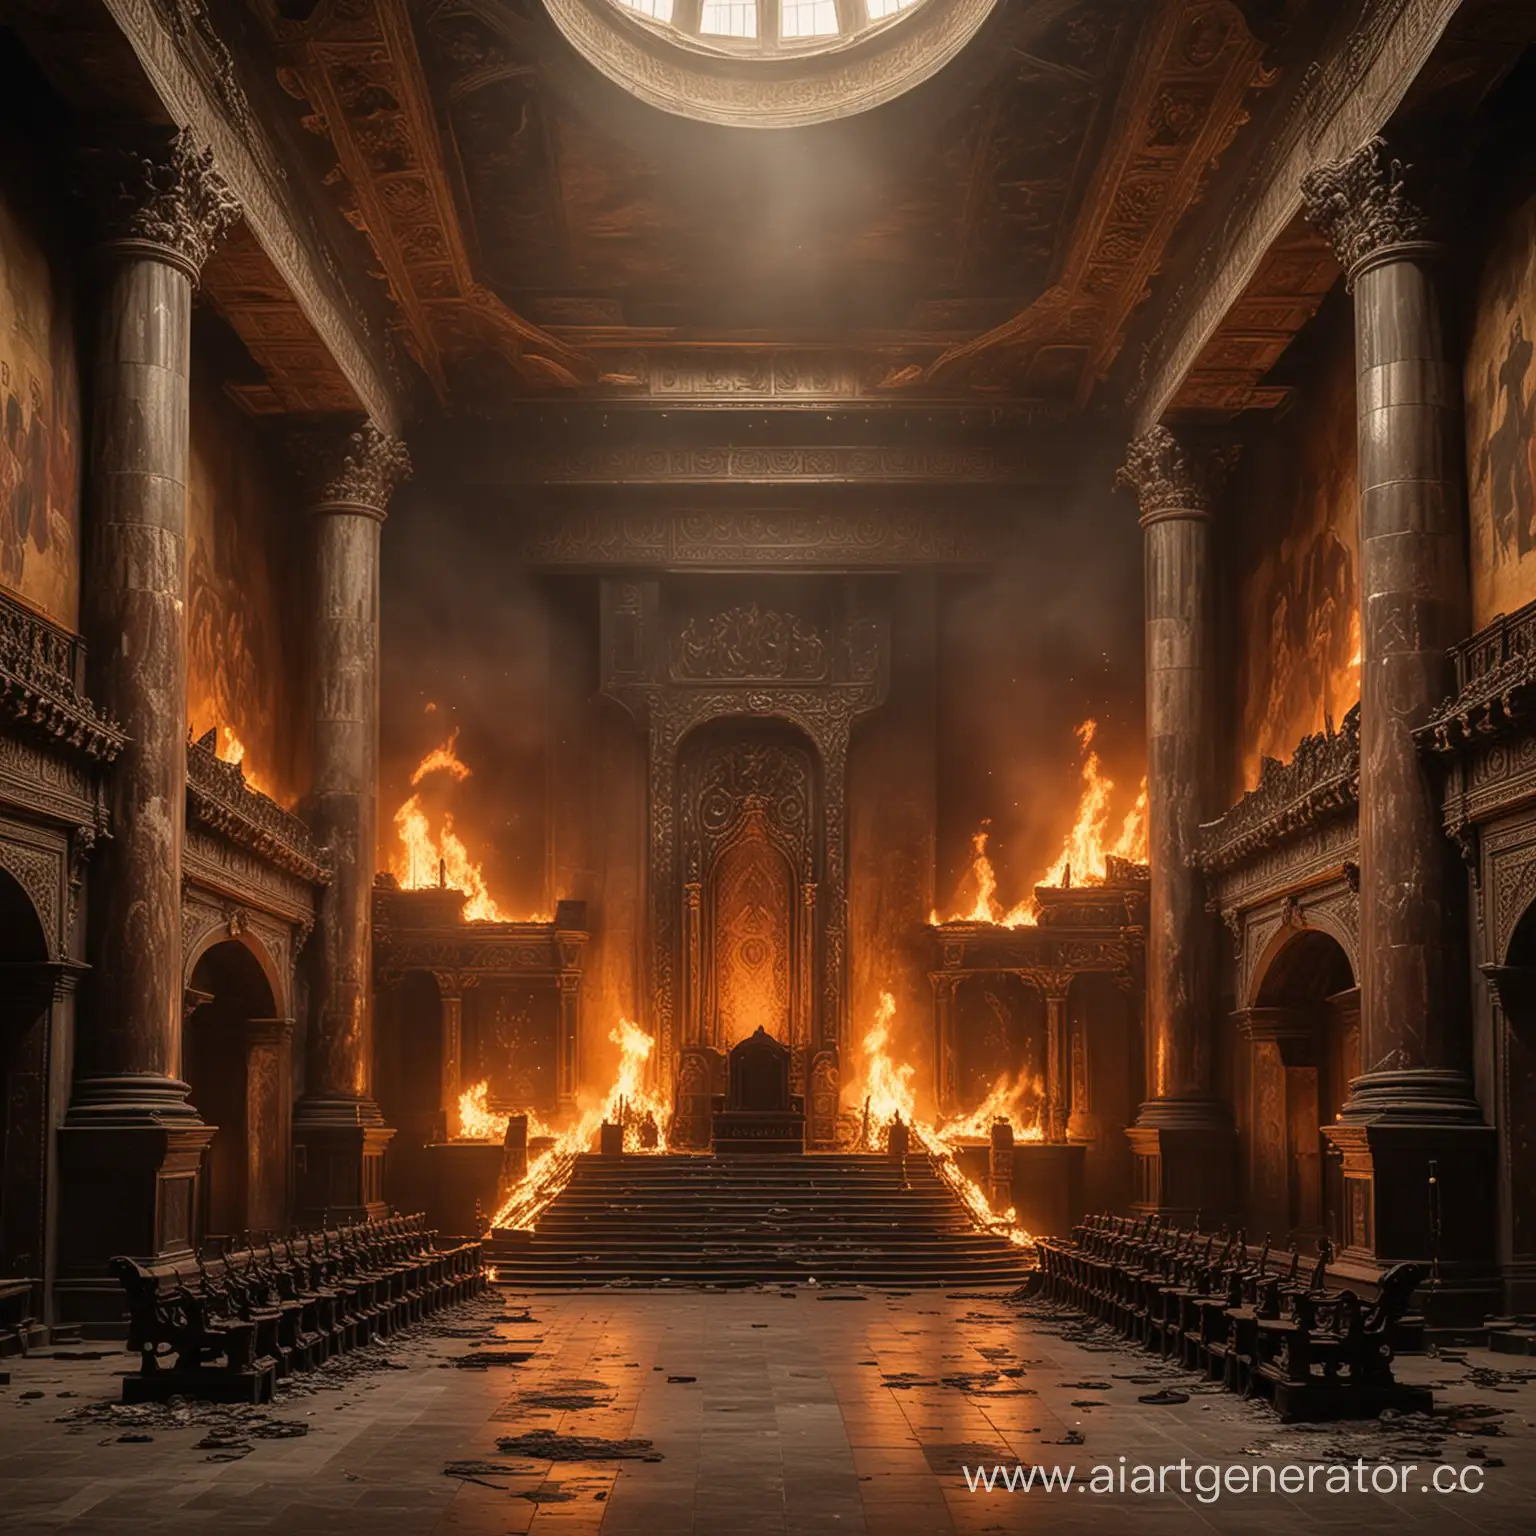 The audience hall, with a large throne, high walls, engulfed in raging flames, without people
